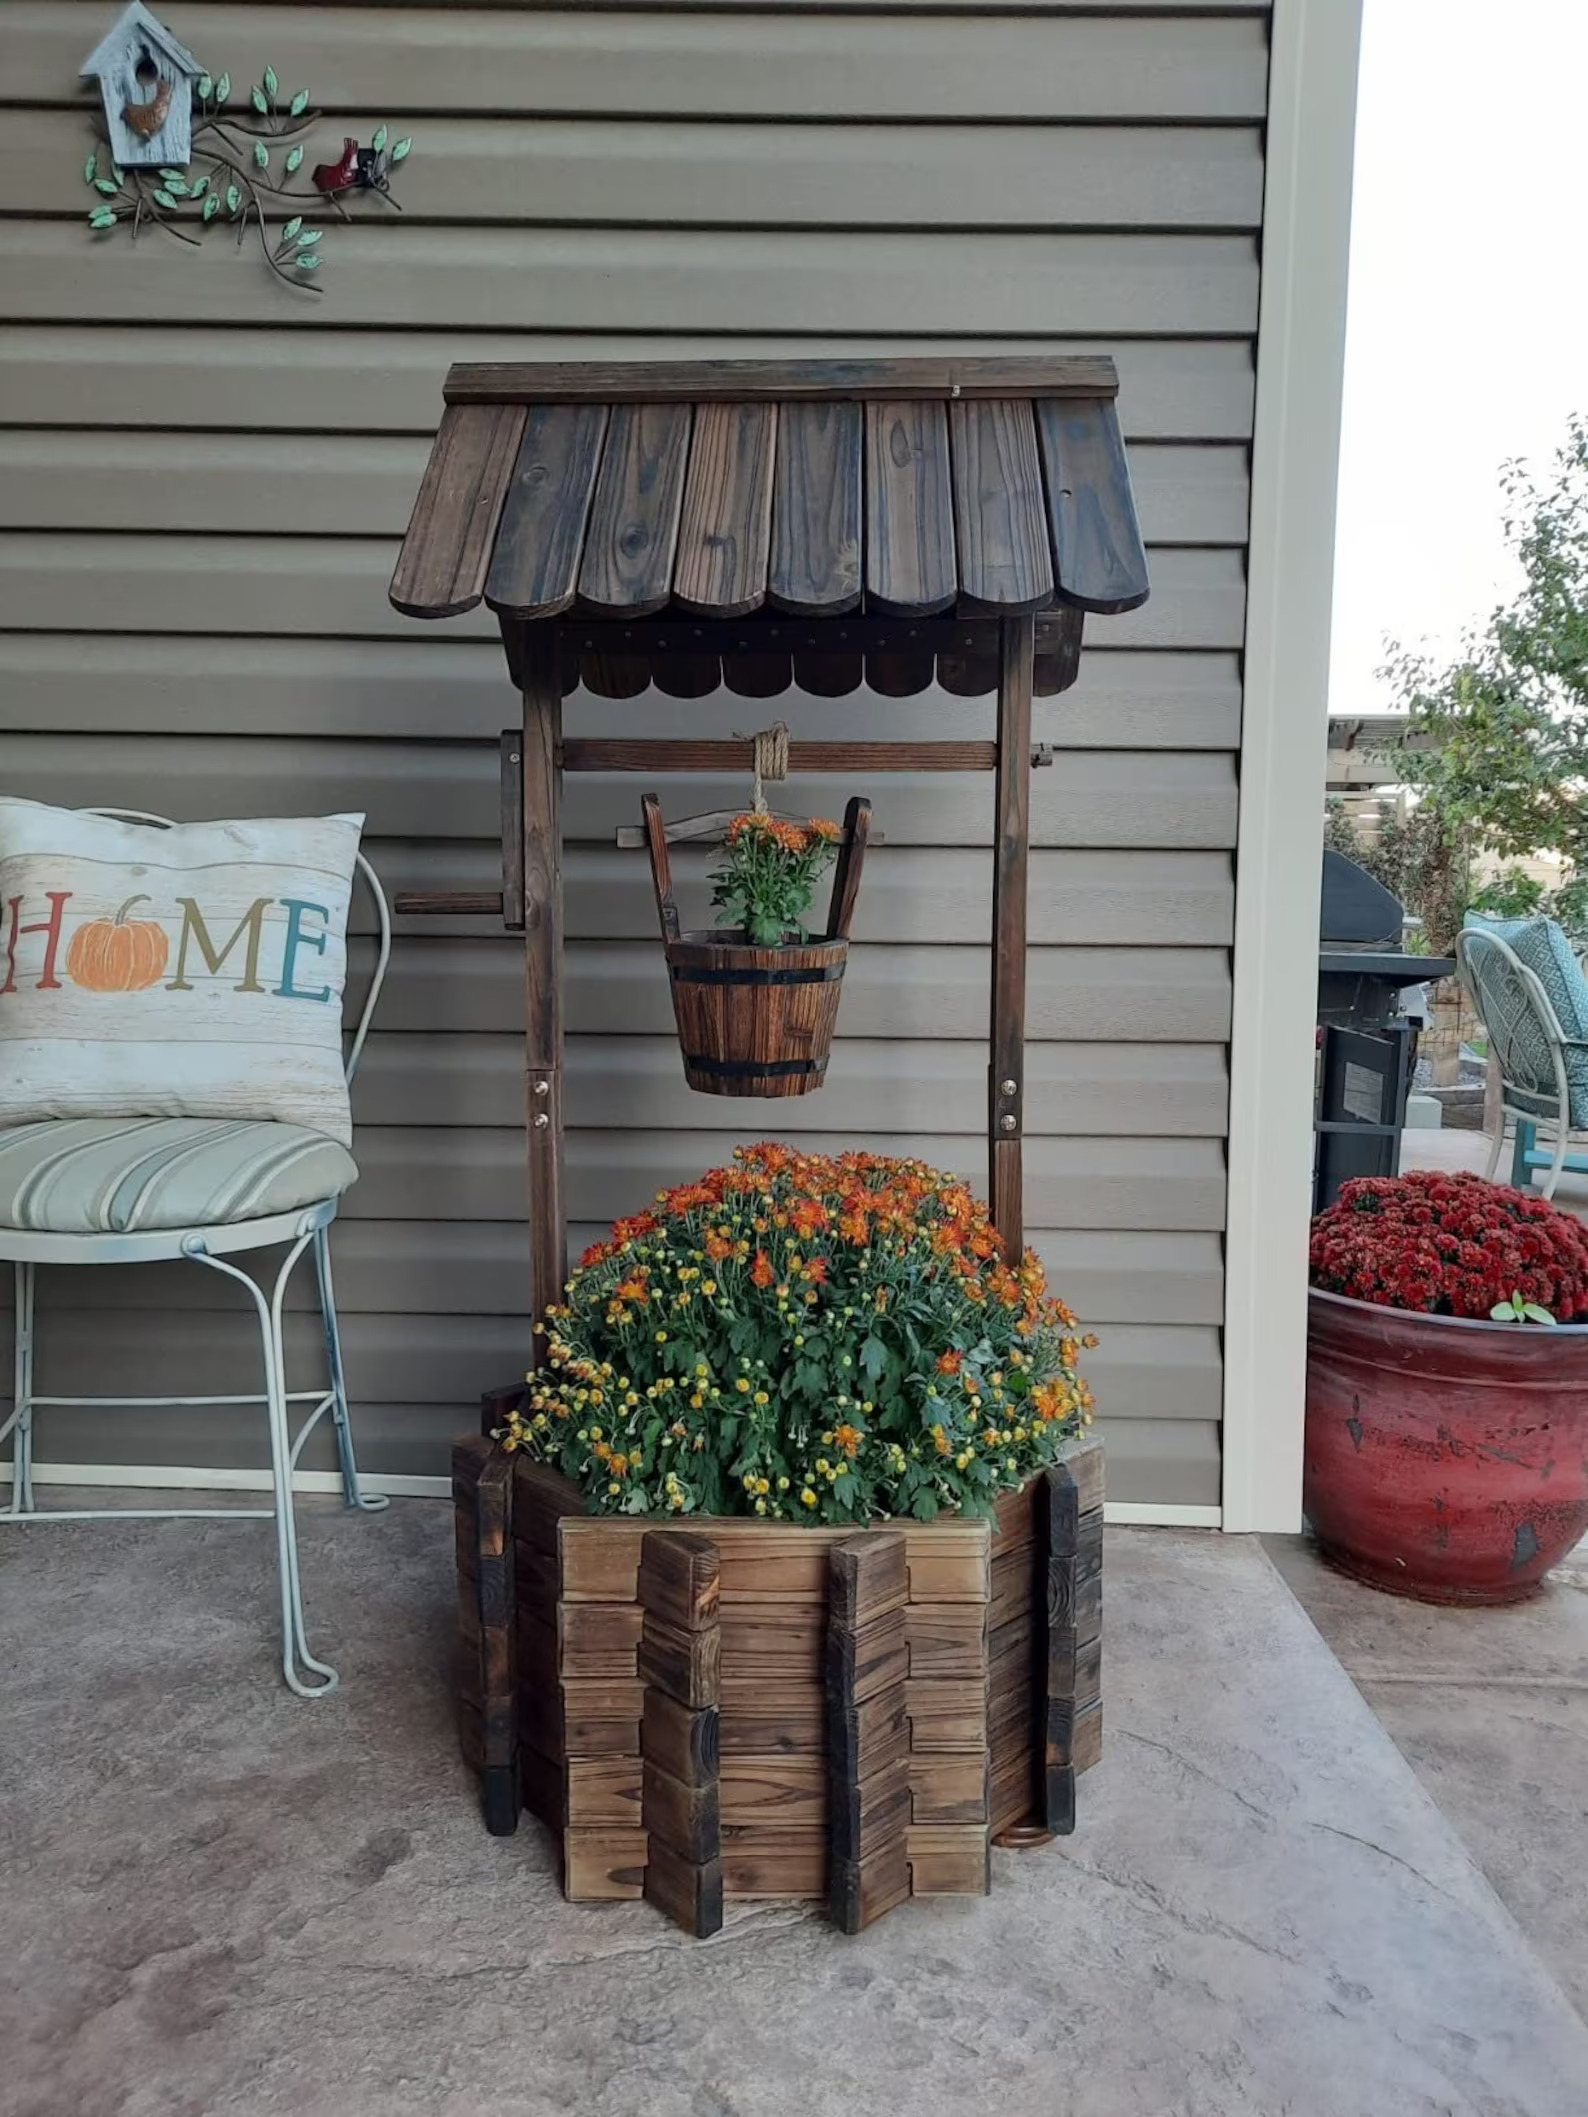 15 Outdoor Planter Designs That Will Make Your Patio Pop